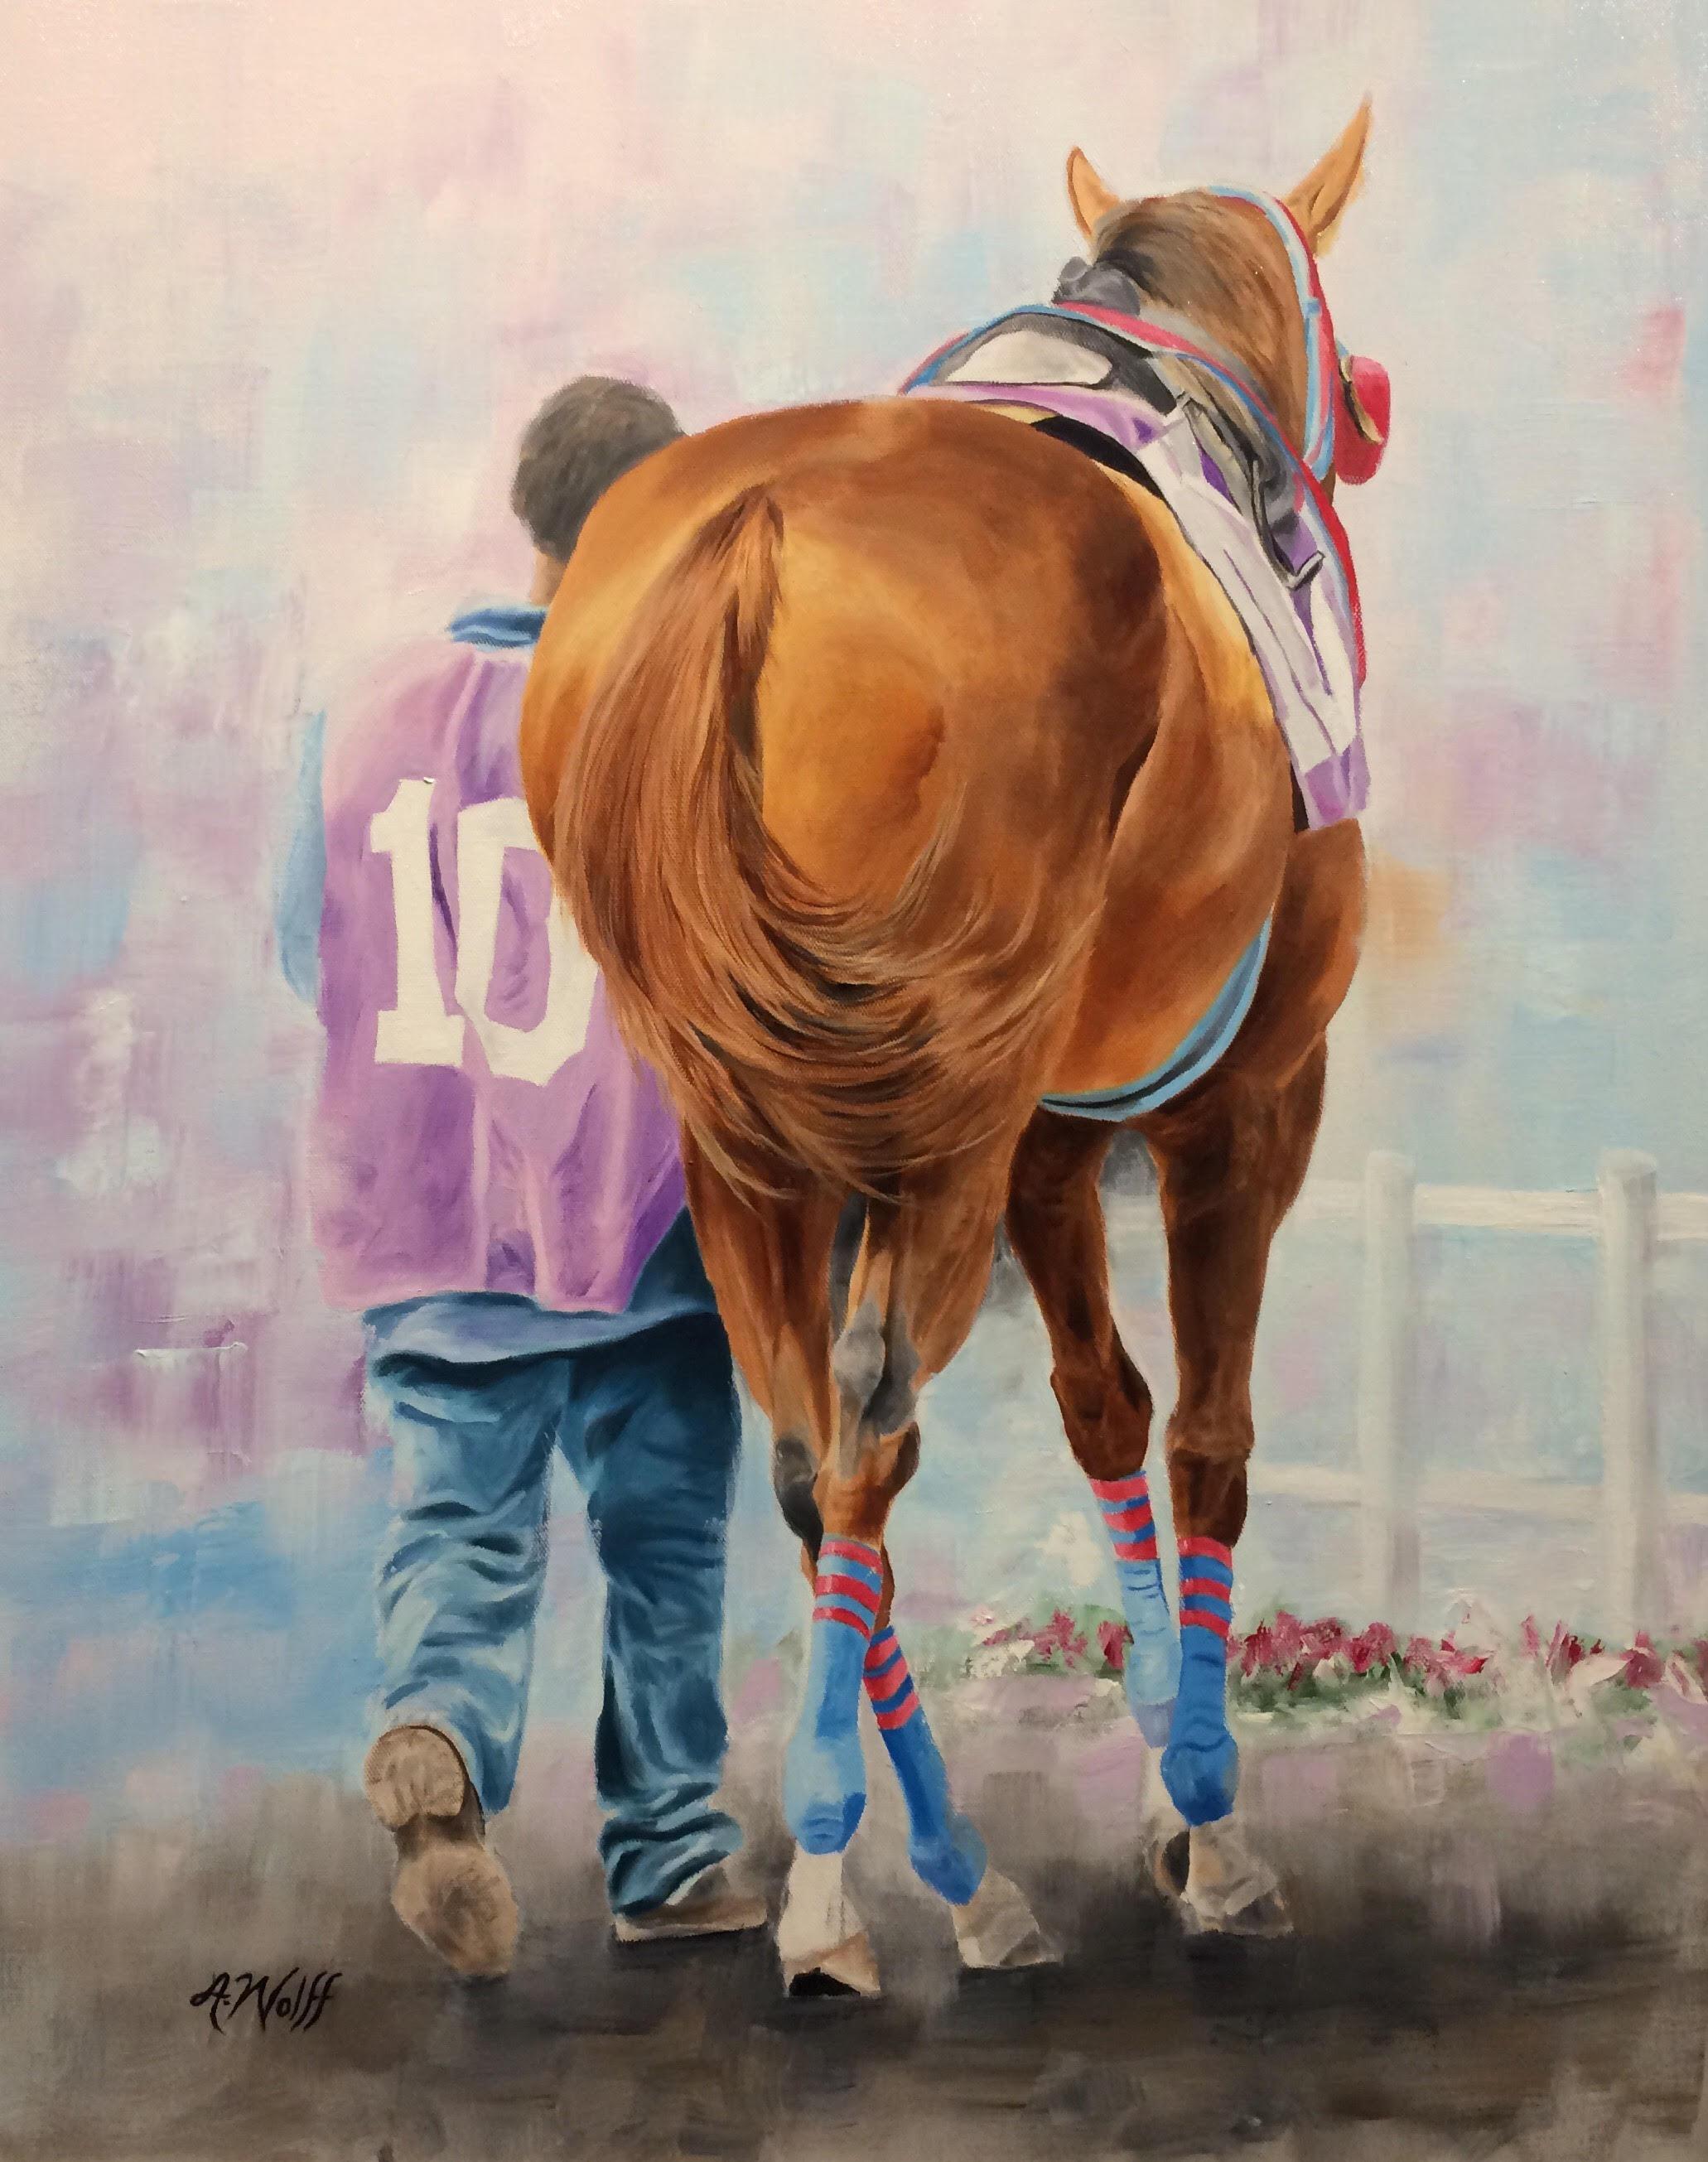 Anne Wolff, "#10", Racing Equine Oil Painting on Canvas